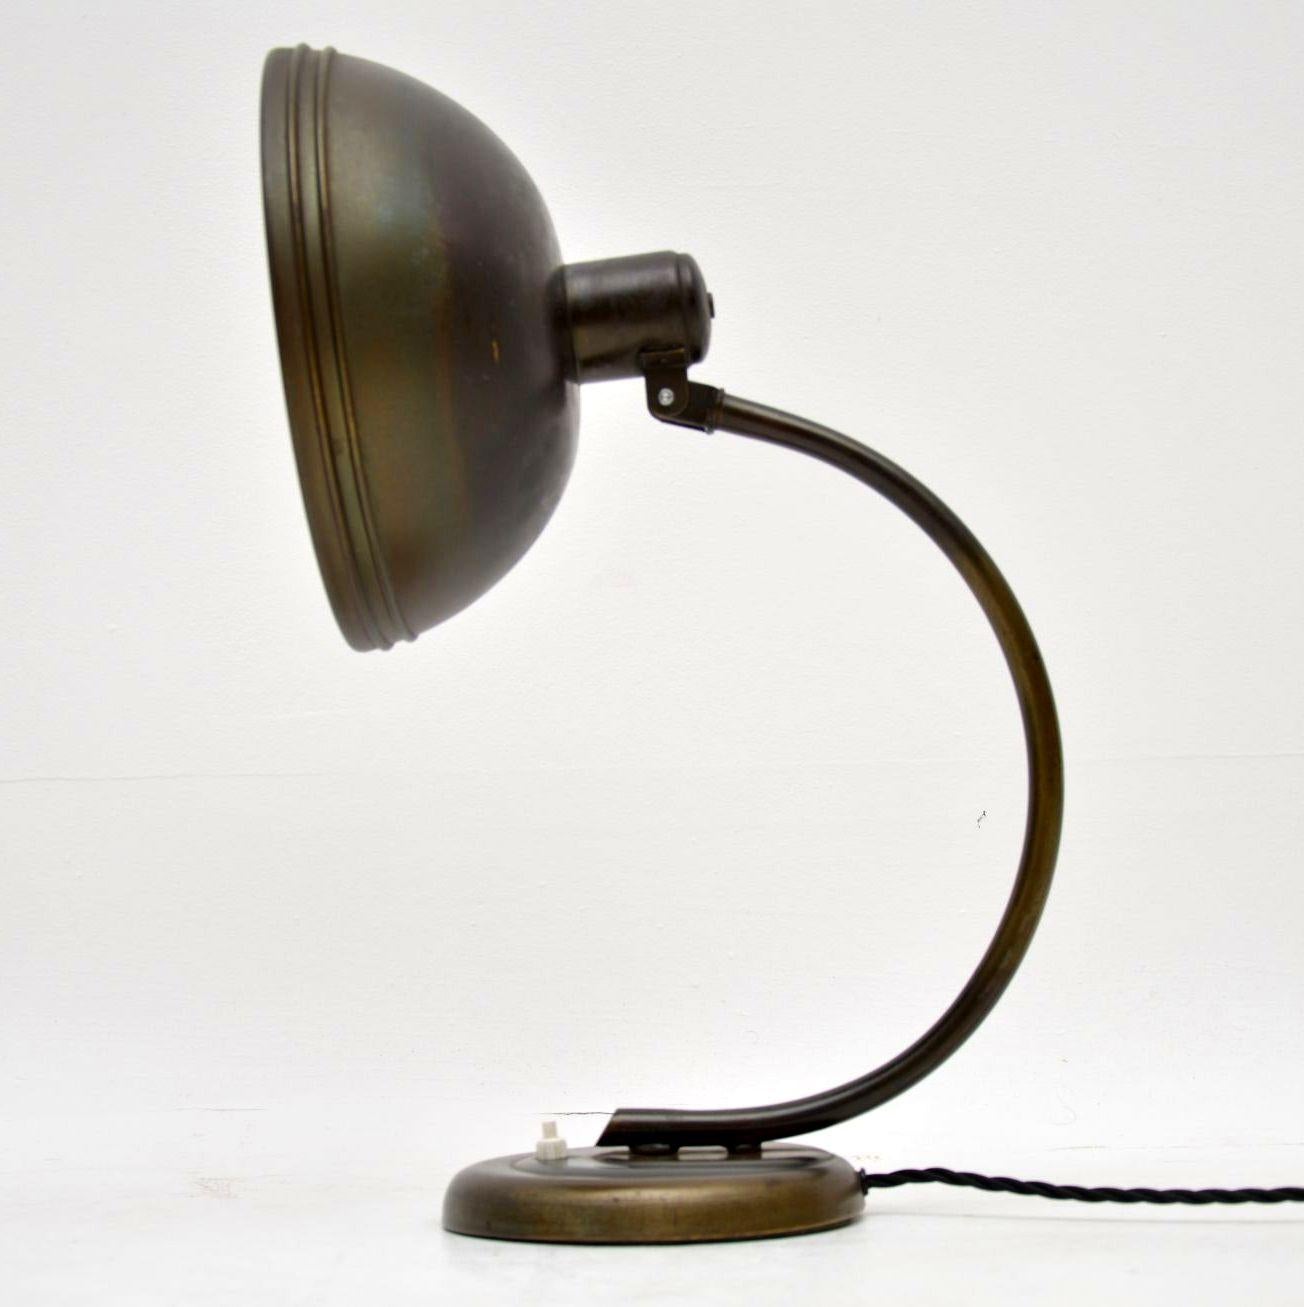 A beautiful early midcentury table lamp darting from circa 1940s-1950s, this is very much in the Bauhaus style, it originates from central Europe. The condition is lovely, it’s made from metal that has acquired a gorgeous patina. We have had this